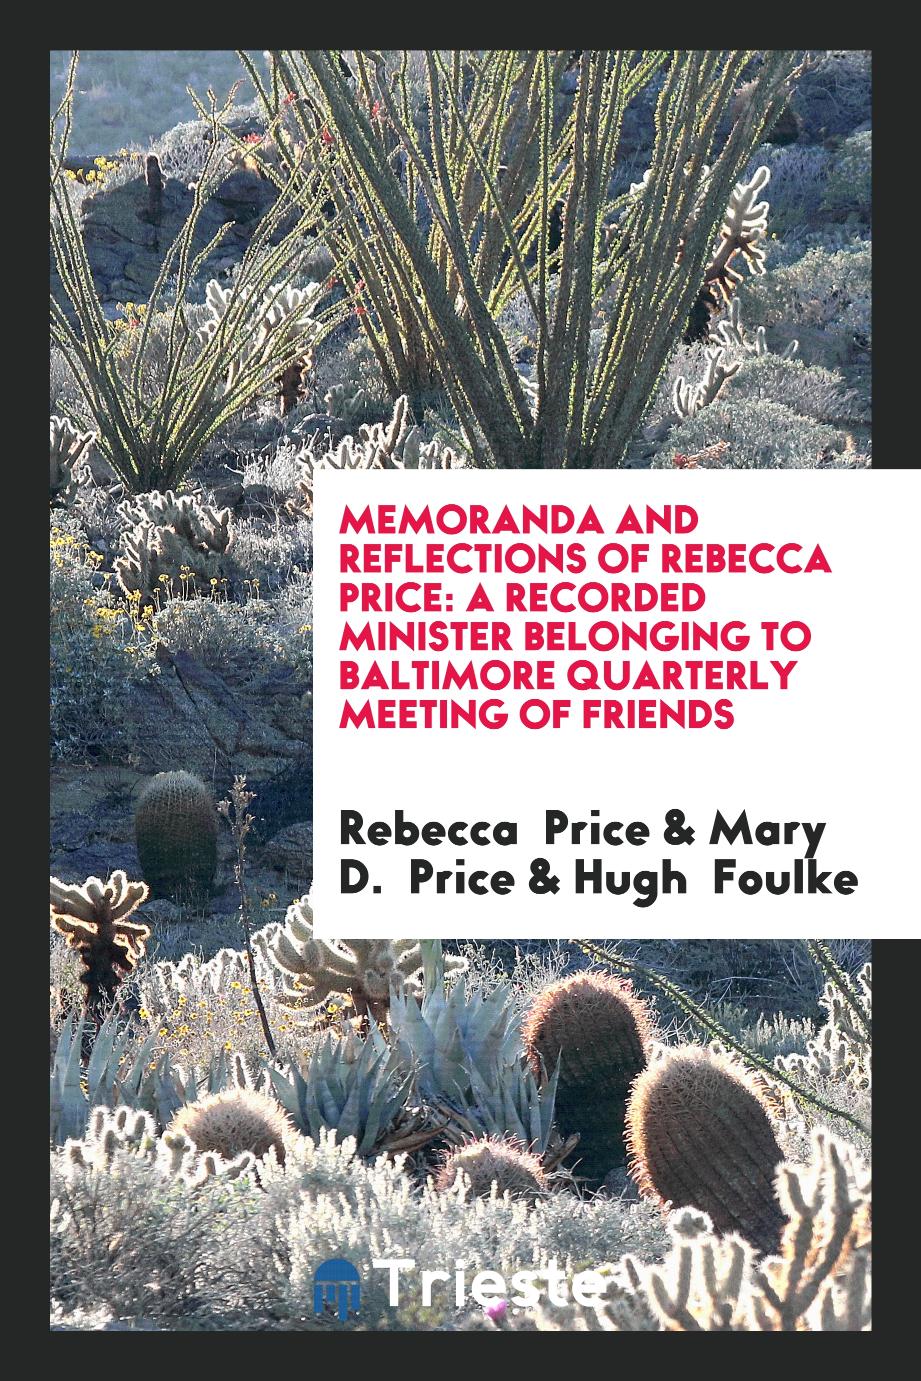 Memoranda and Reflections of Rebecca Price: A Recorded Minister Belonging to Baltimore Quarterly Meeting of Friends